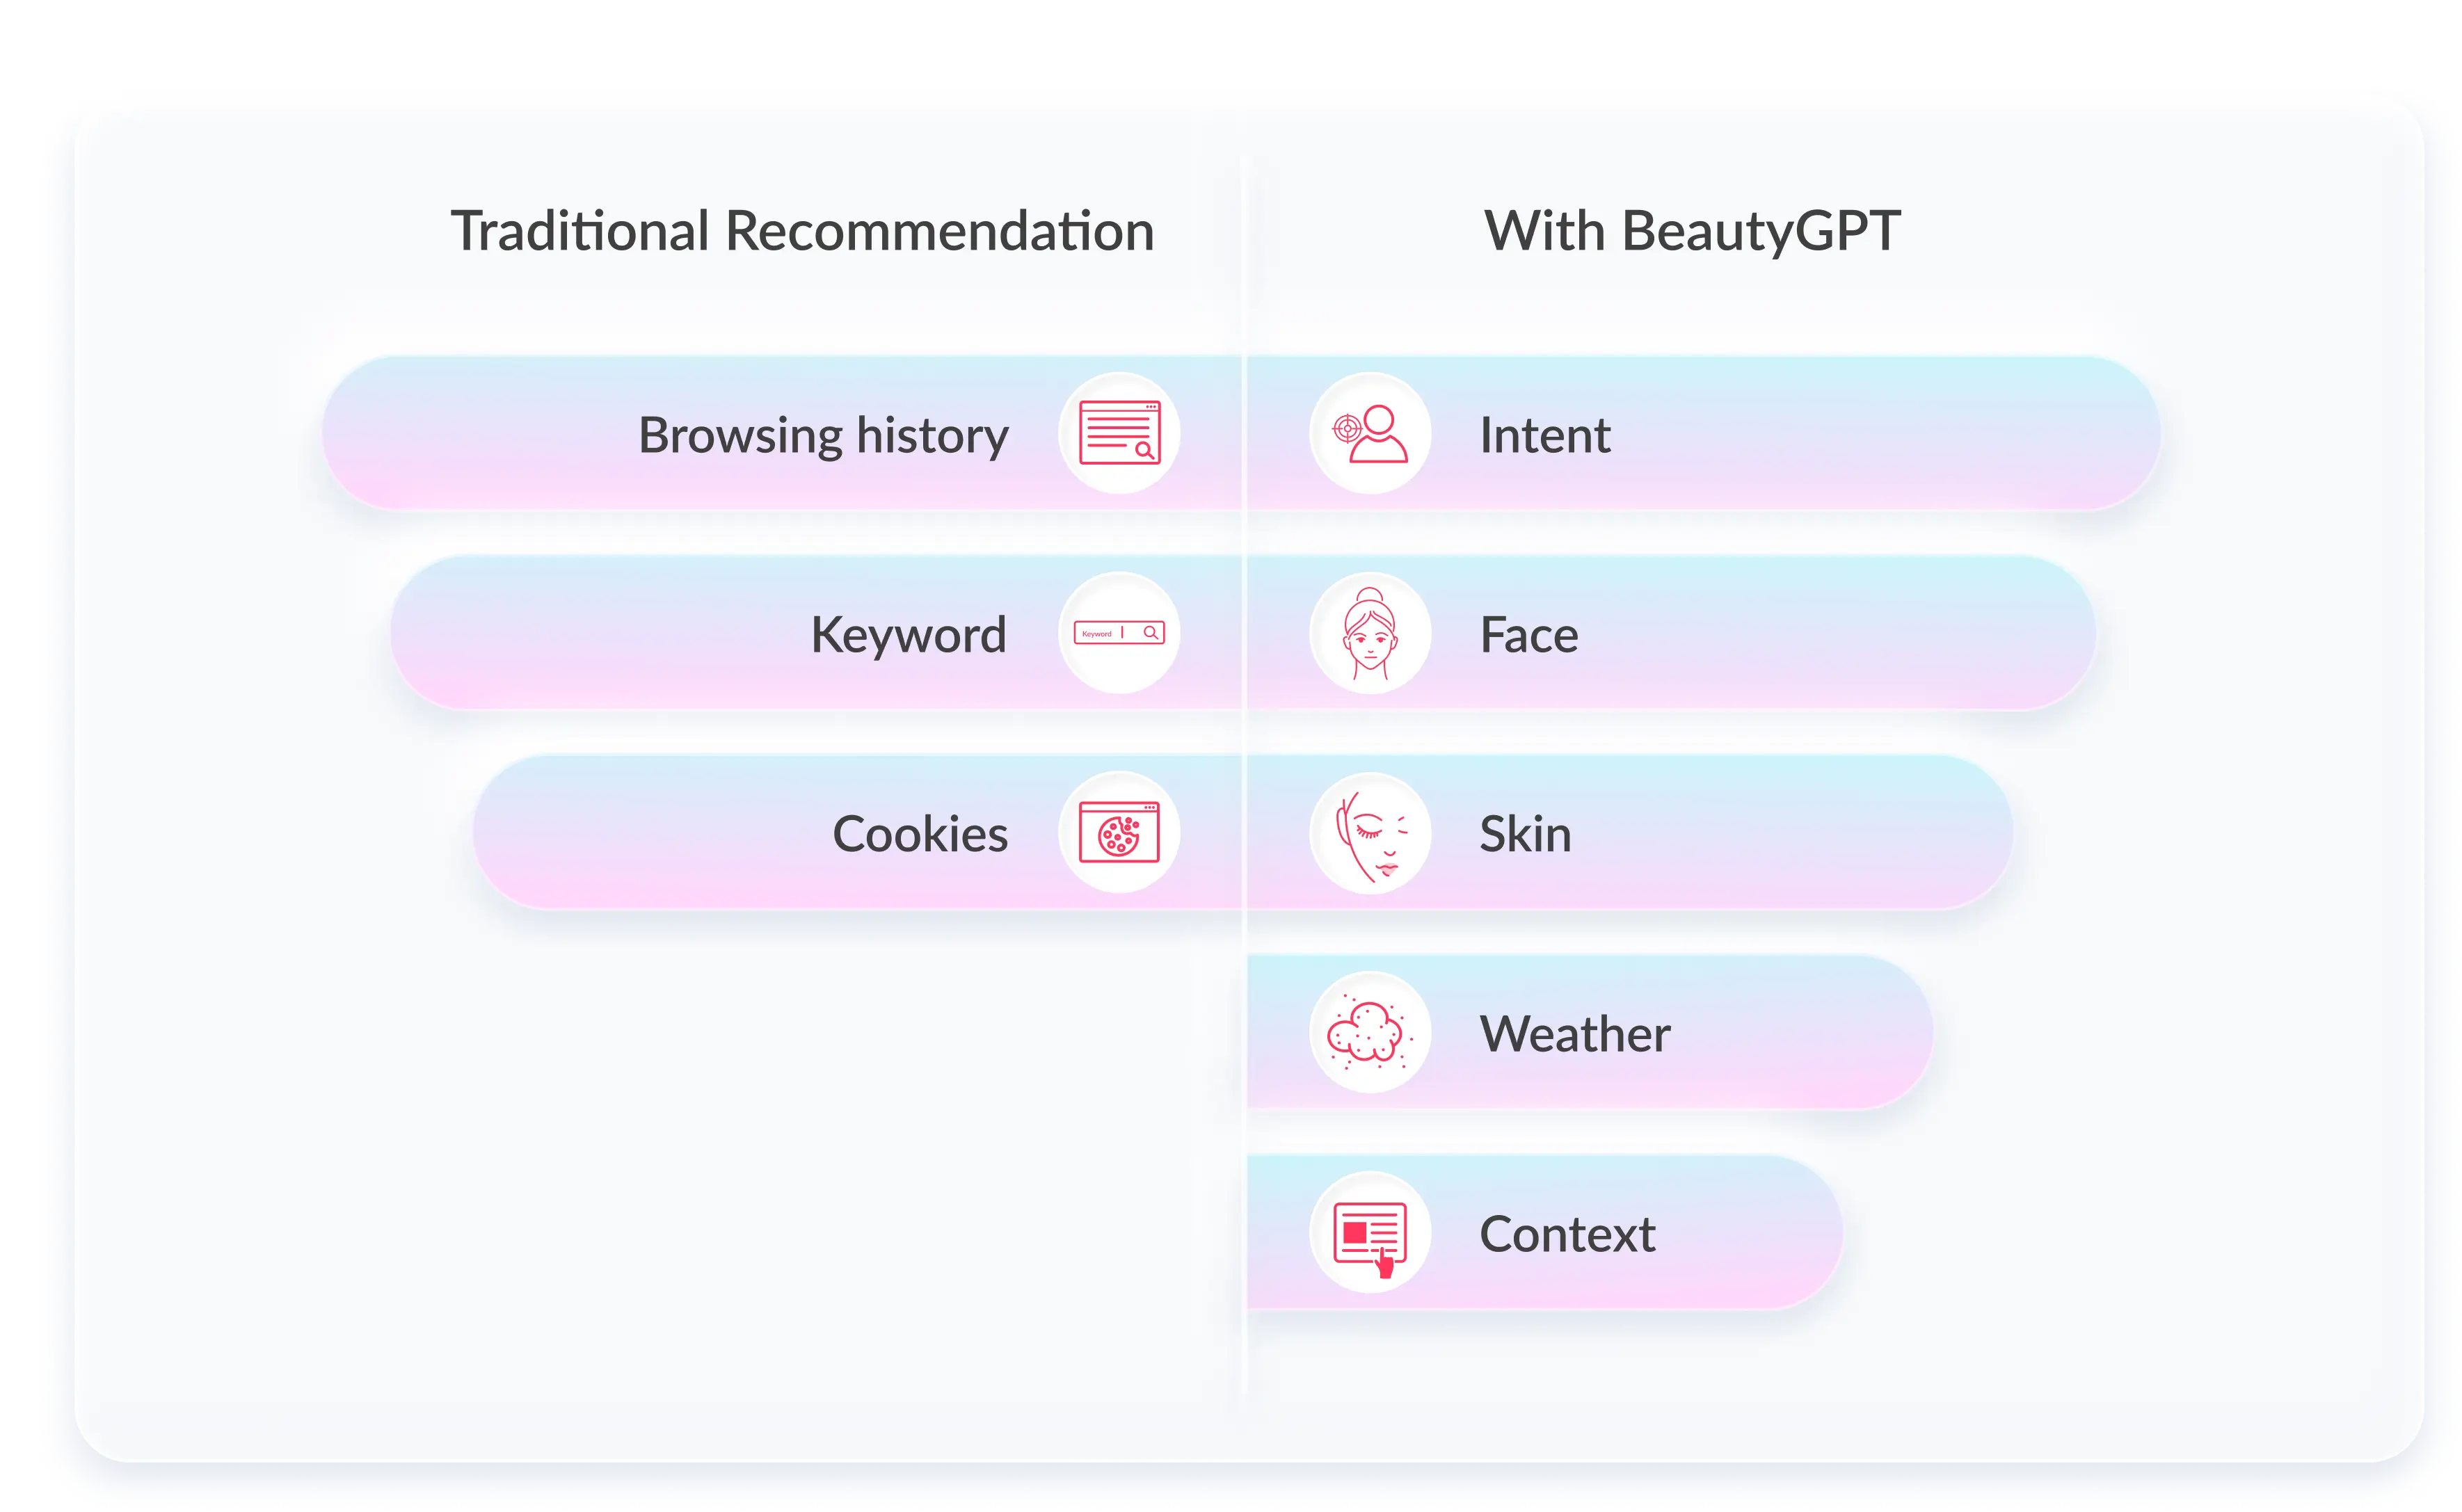 Comparison between traditional recommendation system for E-commerce and recommendations using BeautyGPT